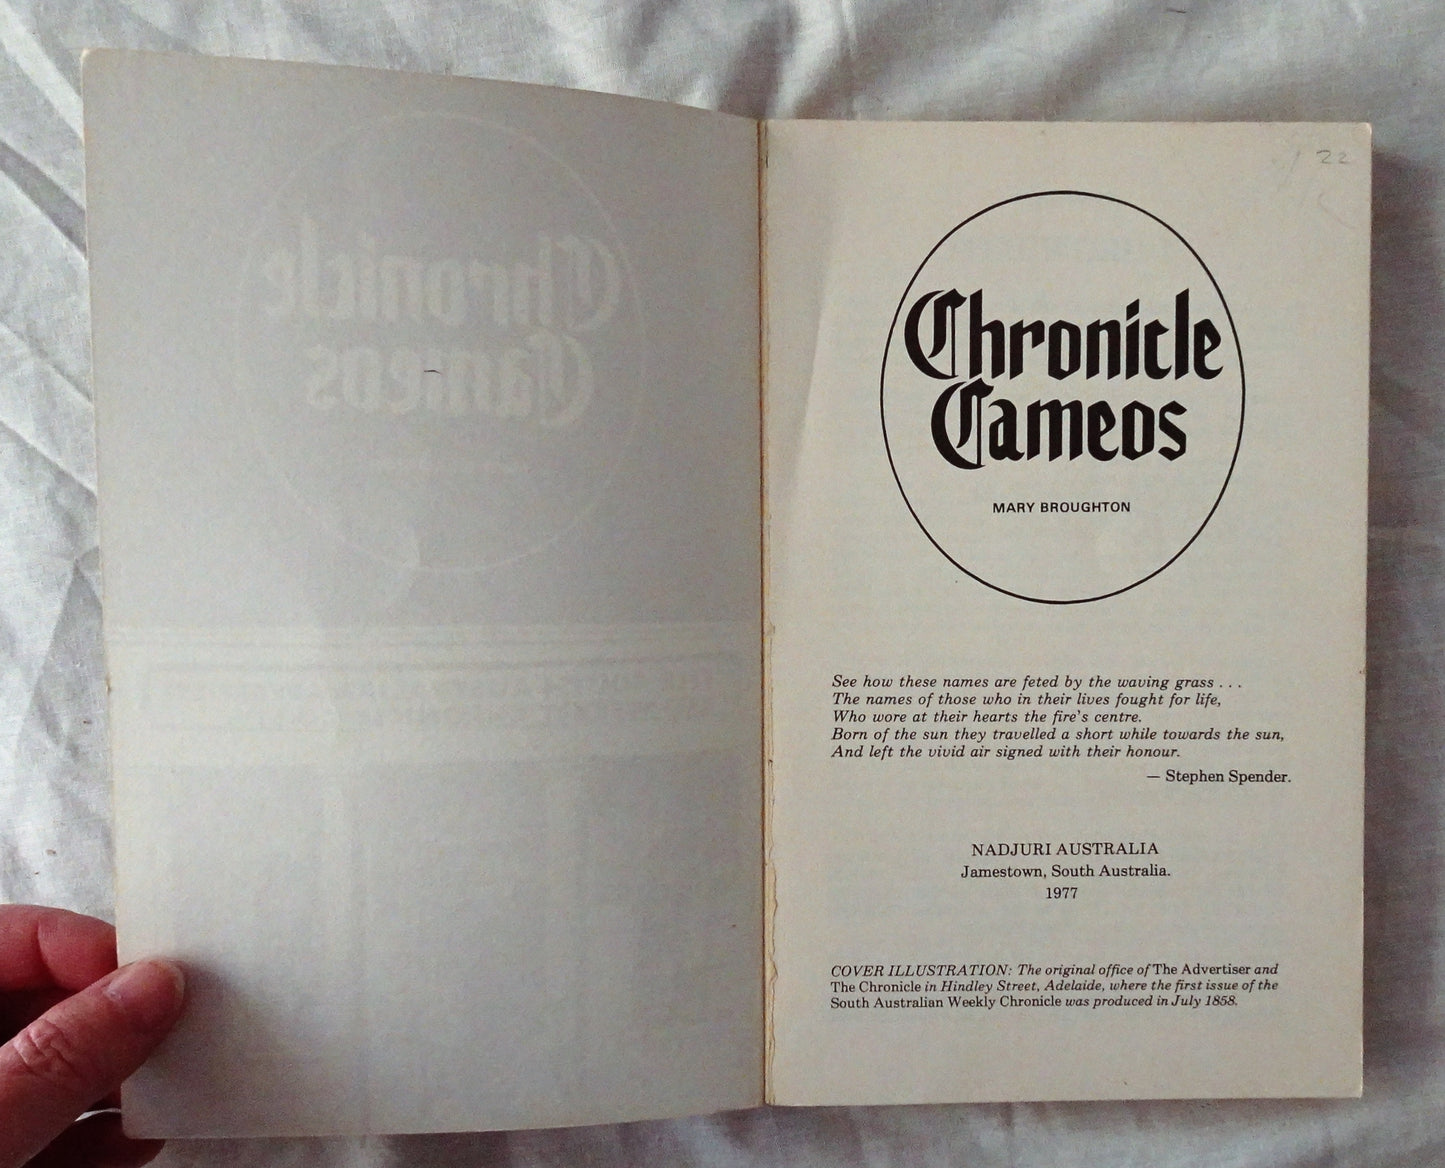 Chronicle Cameos by Mary Broughton